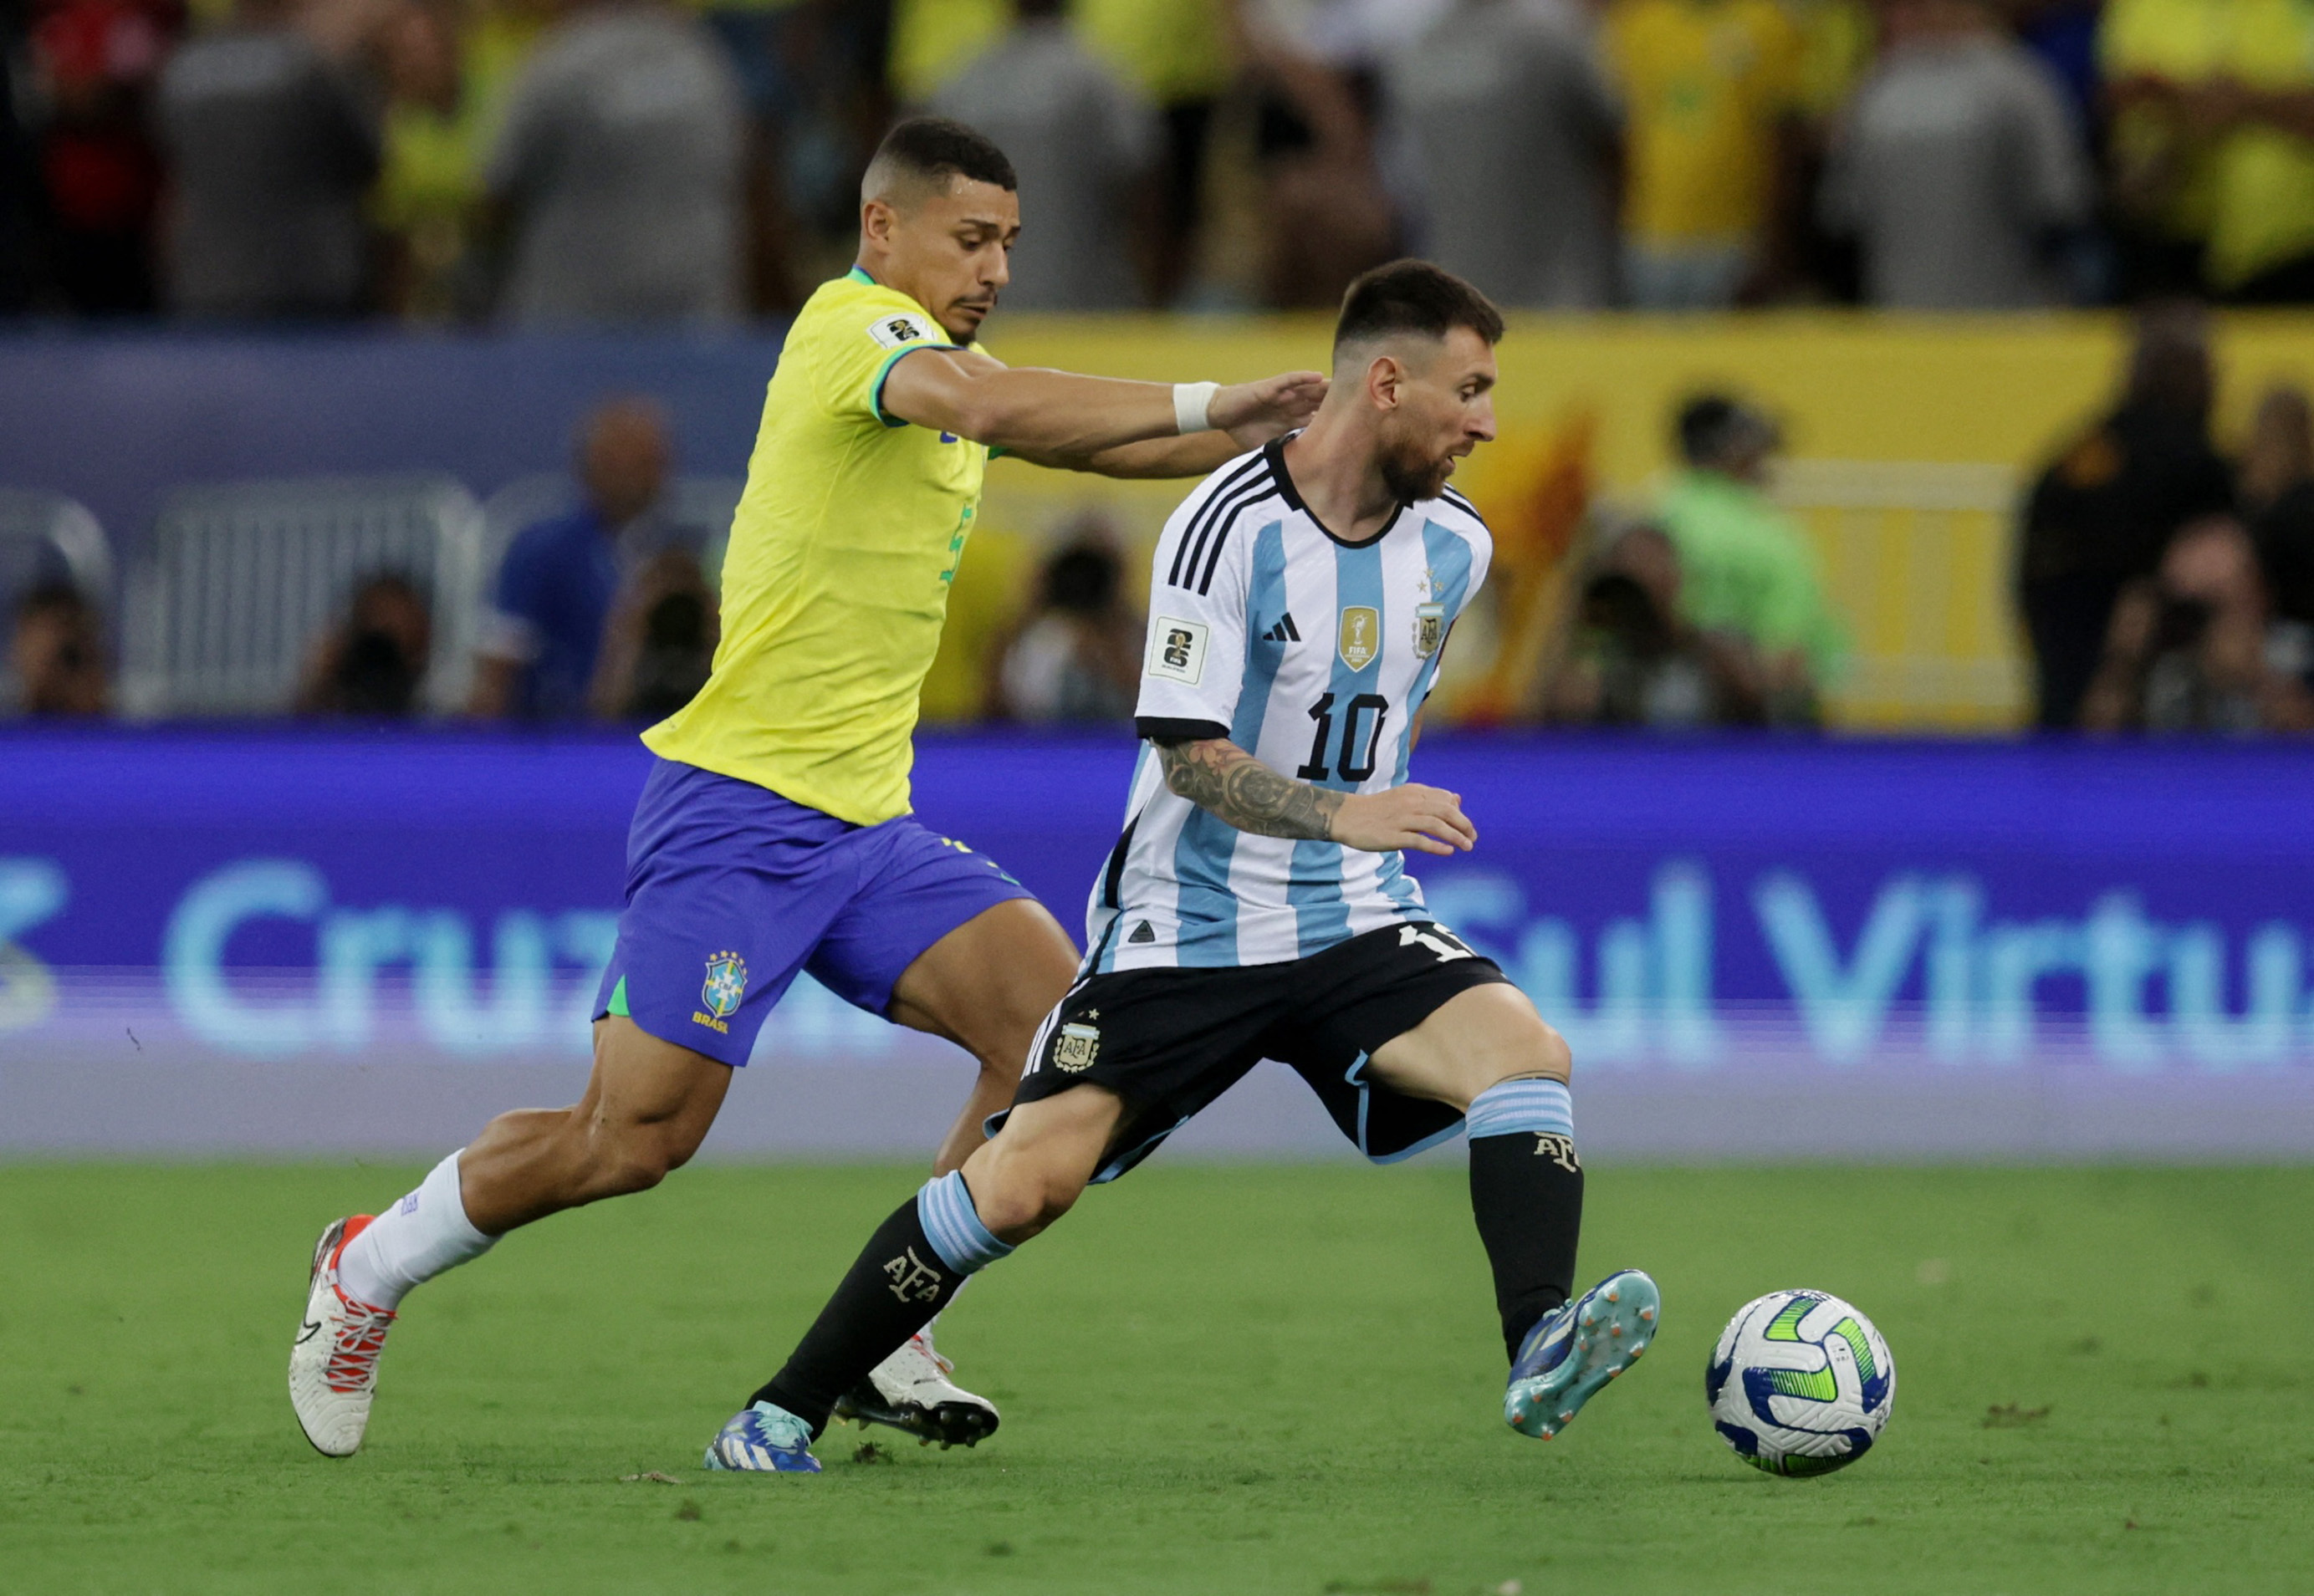 Argentina hand Brazil third straight loss after crowd trouble at Maracana | Reuters